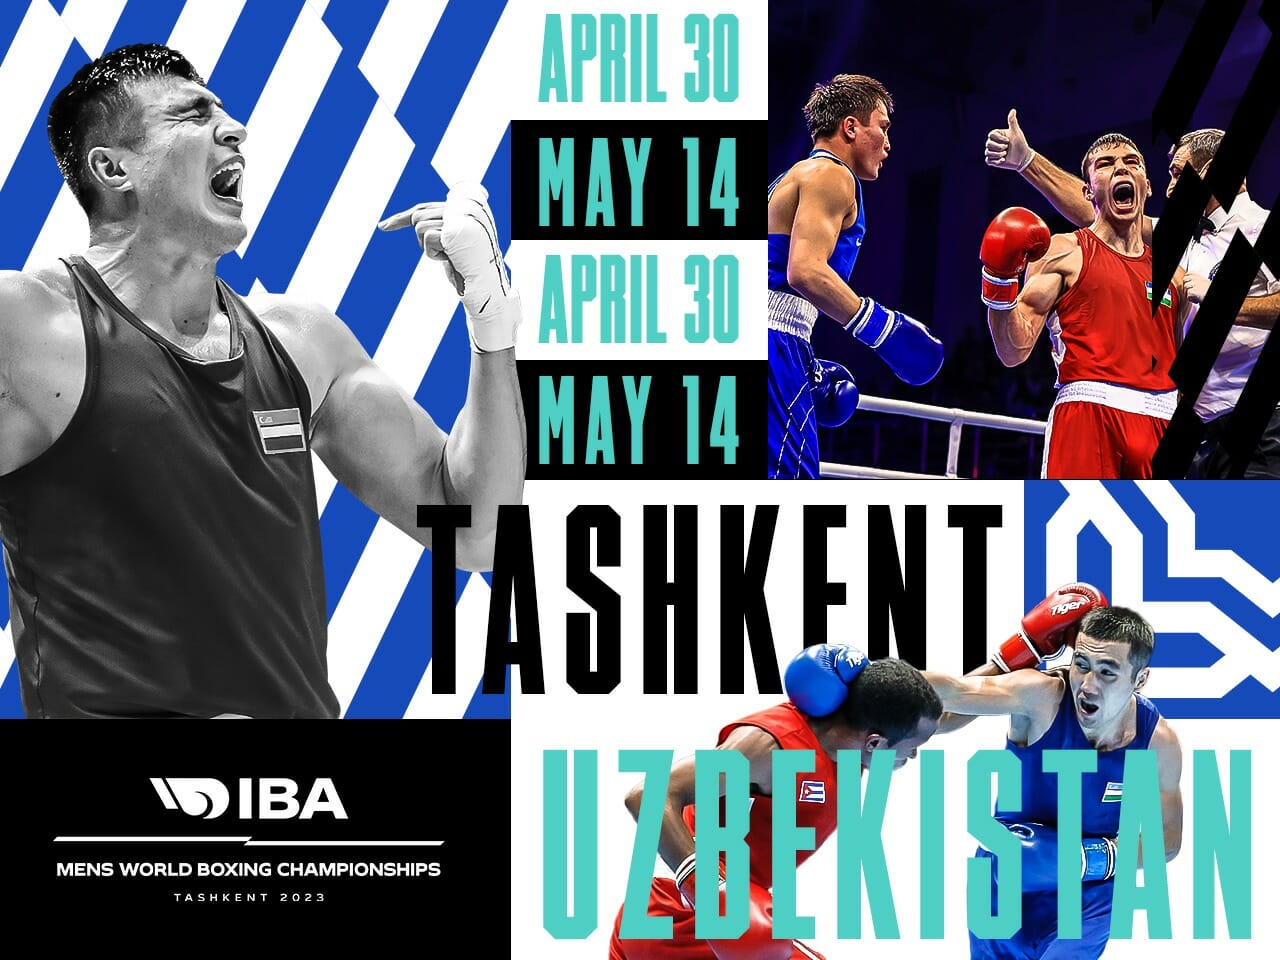 IBA promotional poster